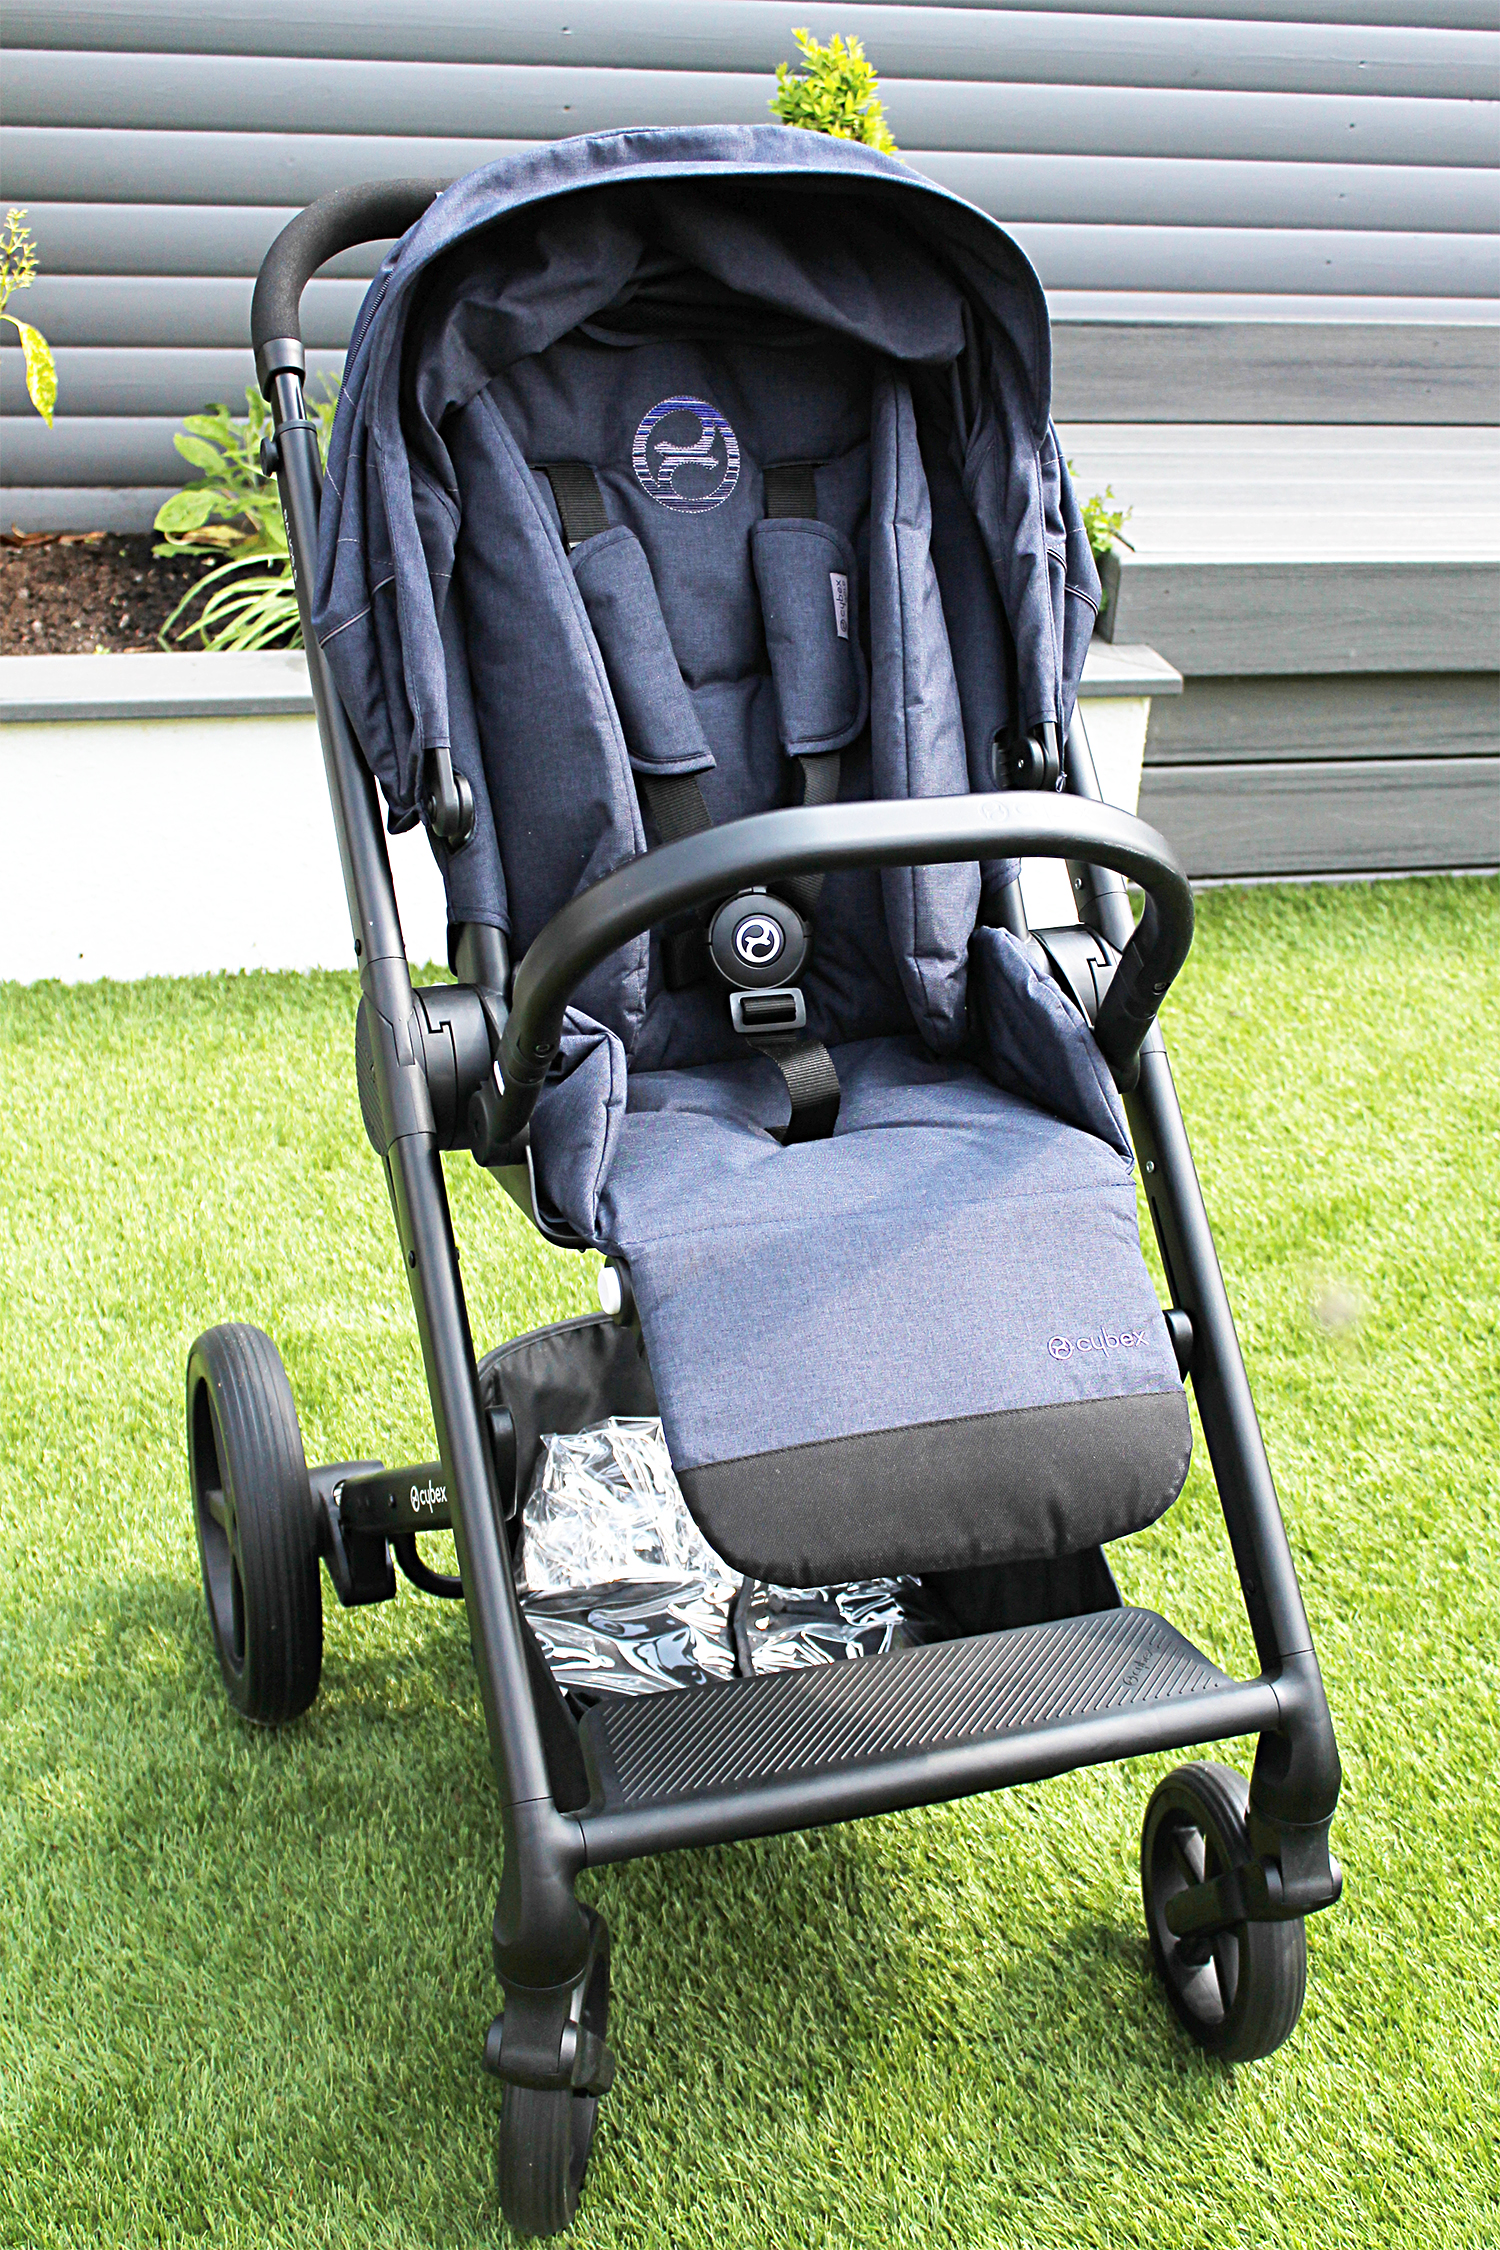 A Cybex Balios S pram with the seat unit in place on the chassis